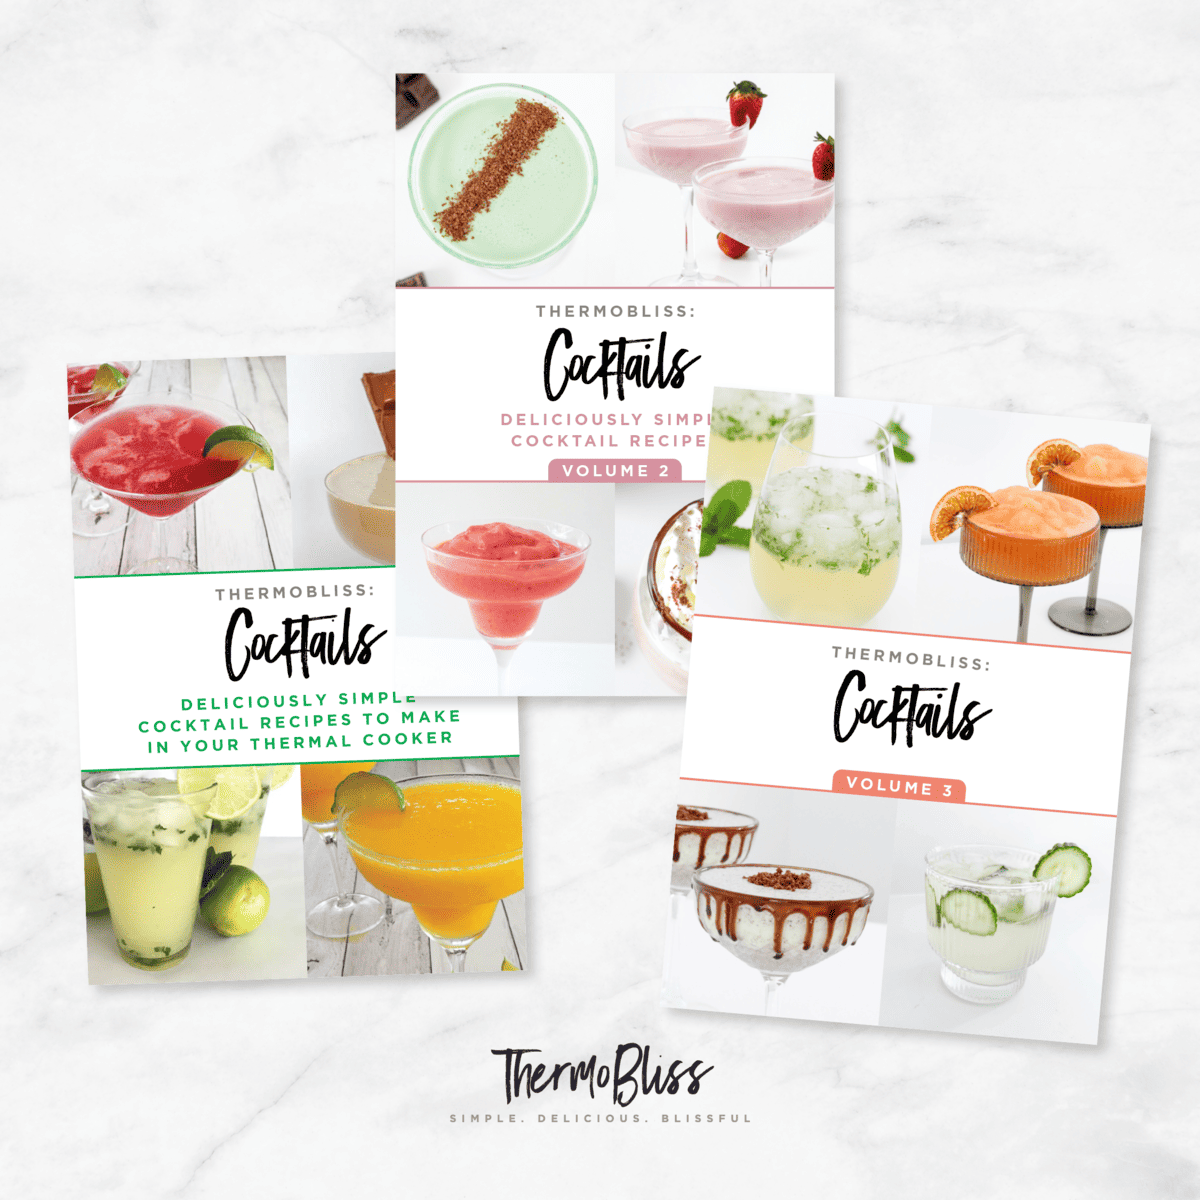 A bundle of Thermomix Cocktails Cookbooks.